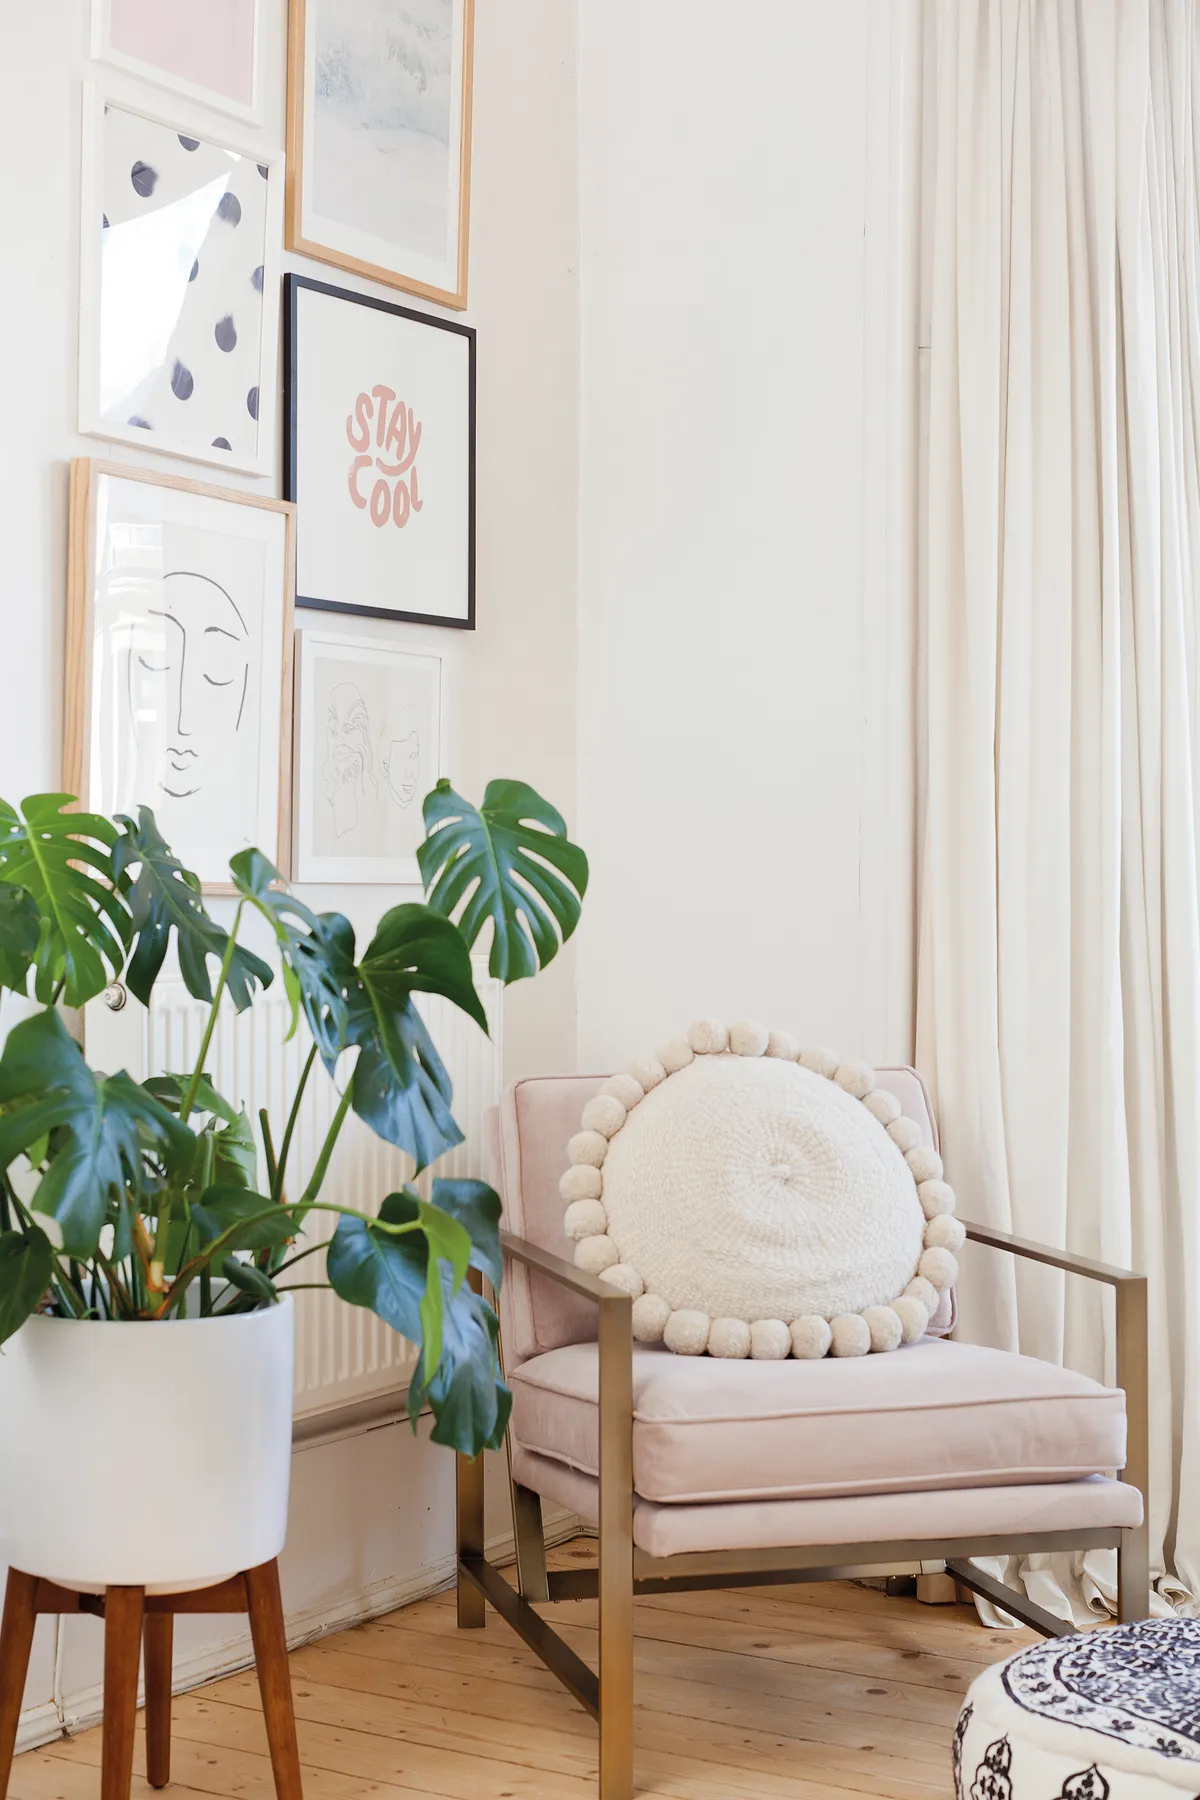 Kate has broken up the white walls with a gallery display of prints from Oliver Bonas, Etsy and Society6. The corner is also a reading nook with a metal frame chair from West Elm